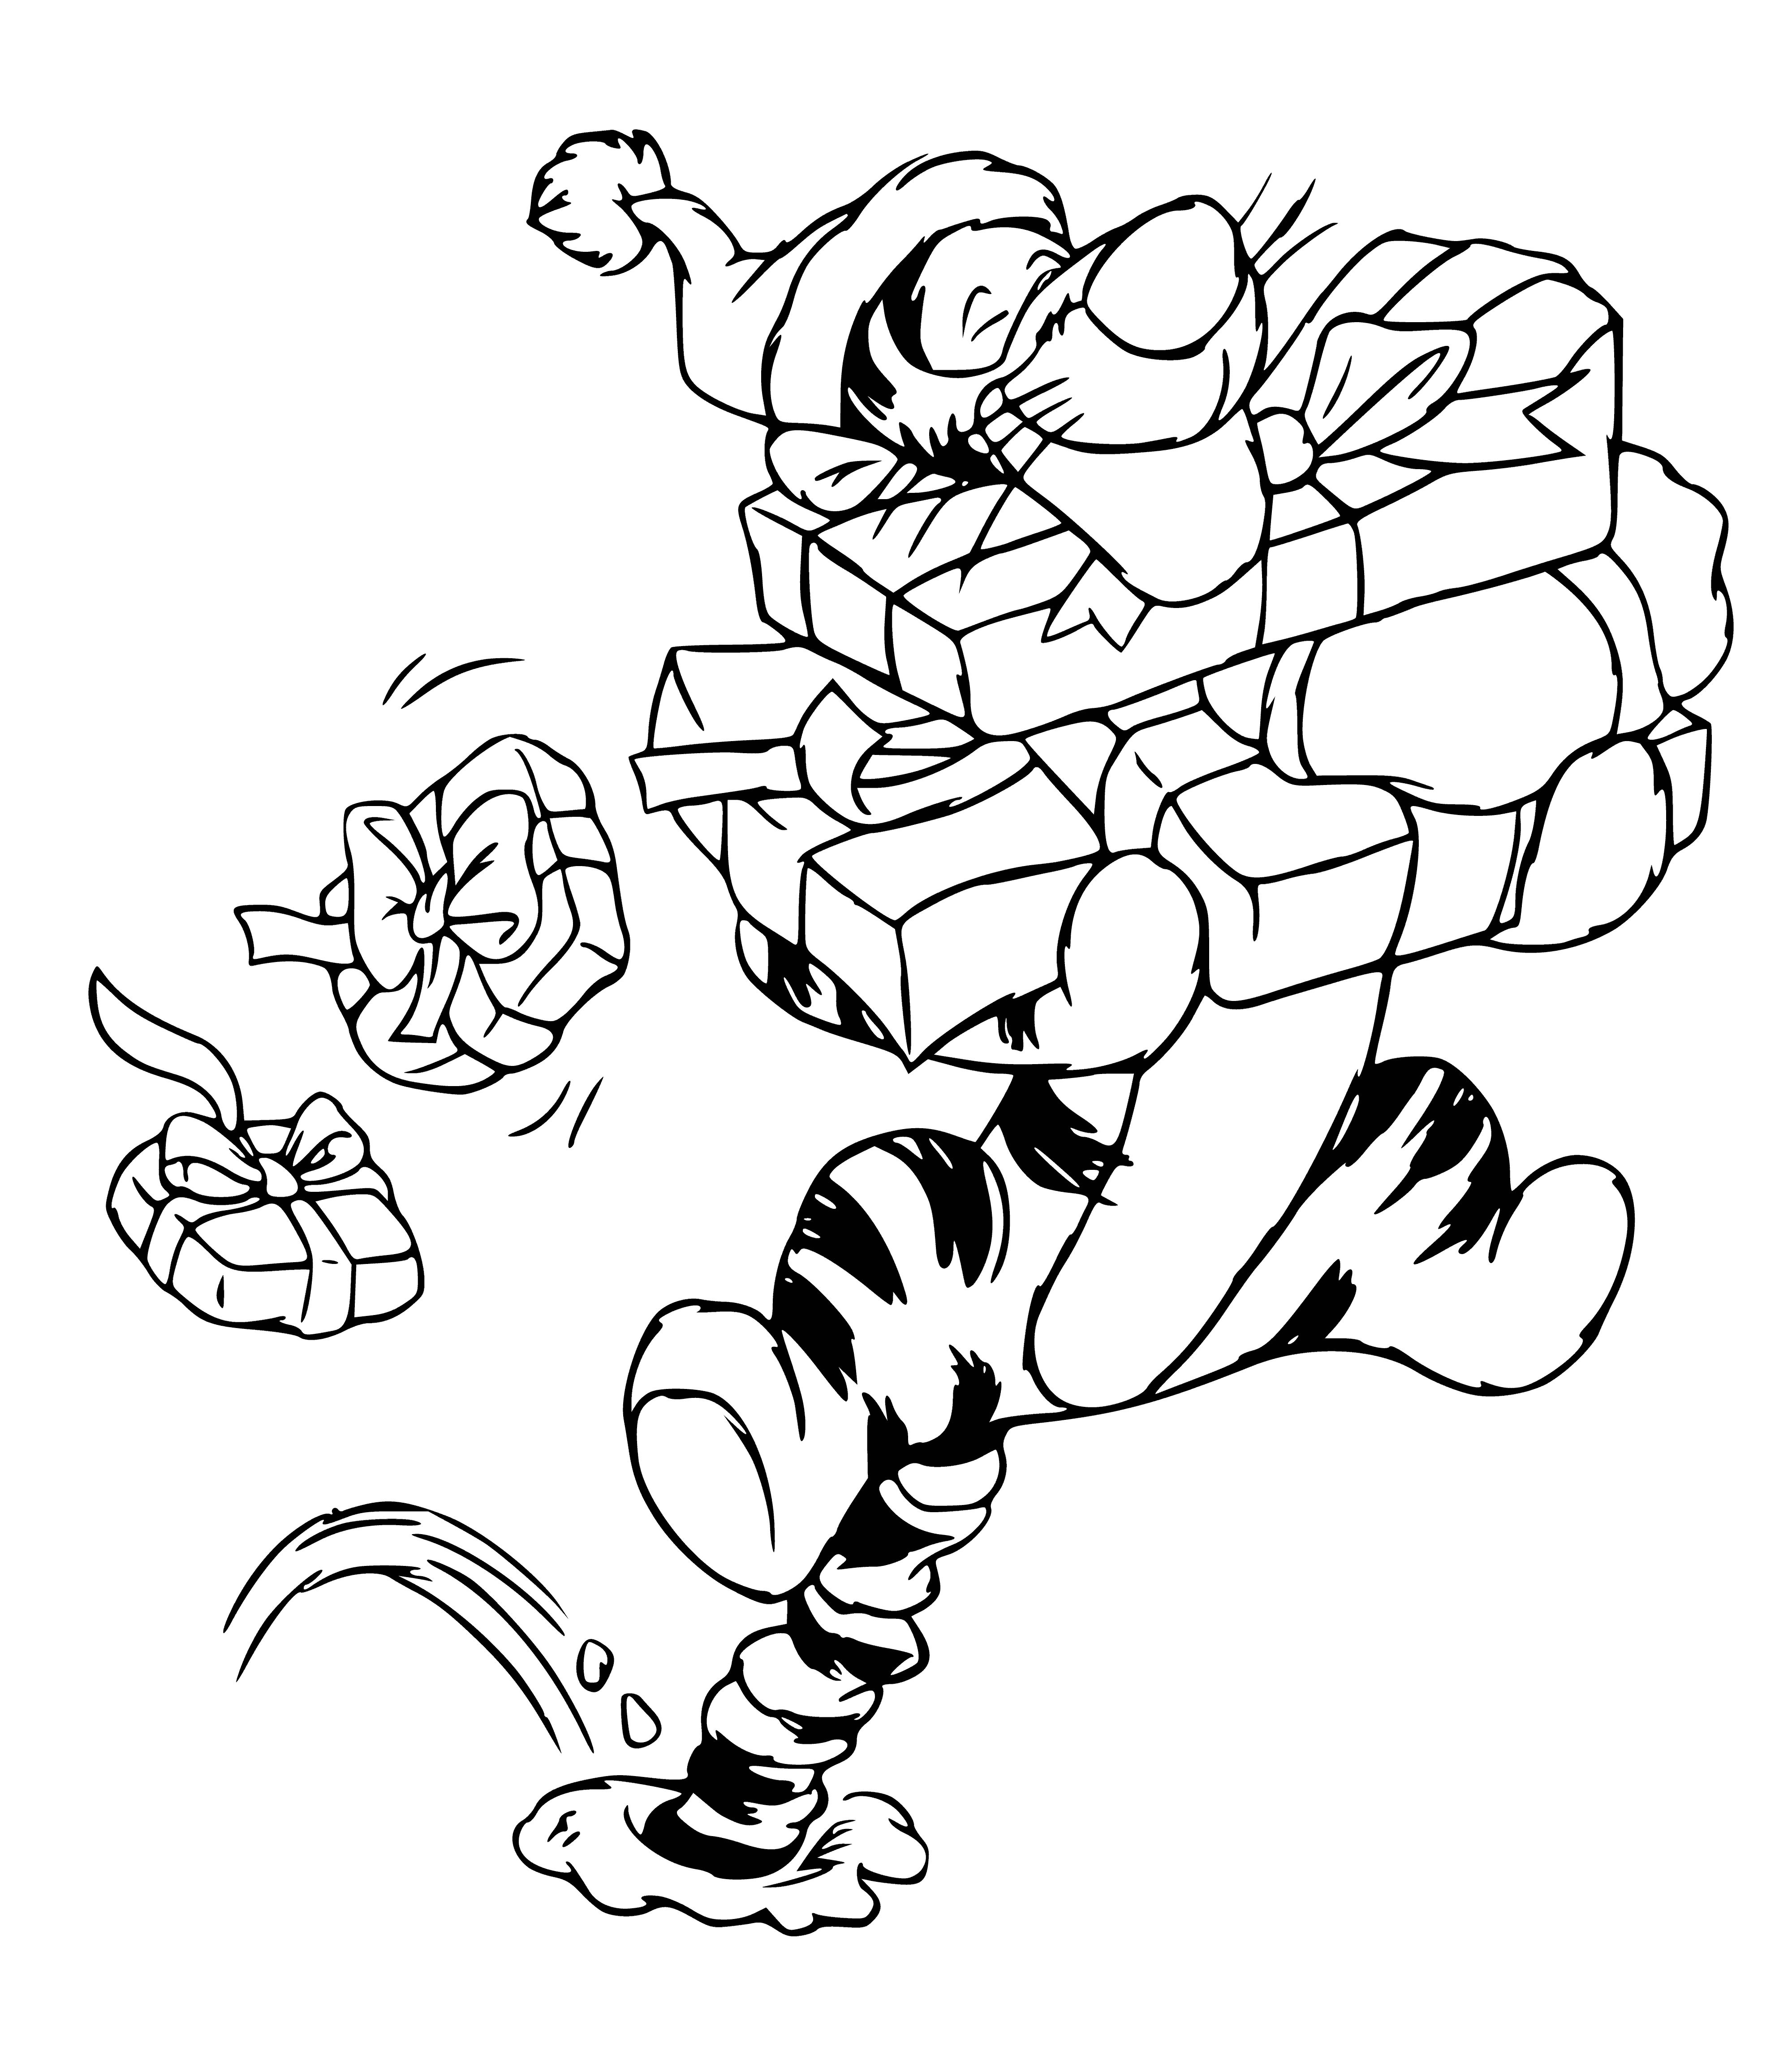 coloring page: Disney characters ringing in 2020! Tiger holds a noisemaker, wears a party hat and stands on a Happy New Year block.